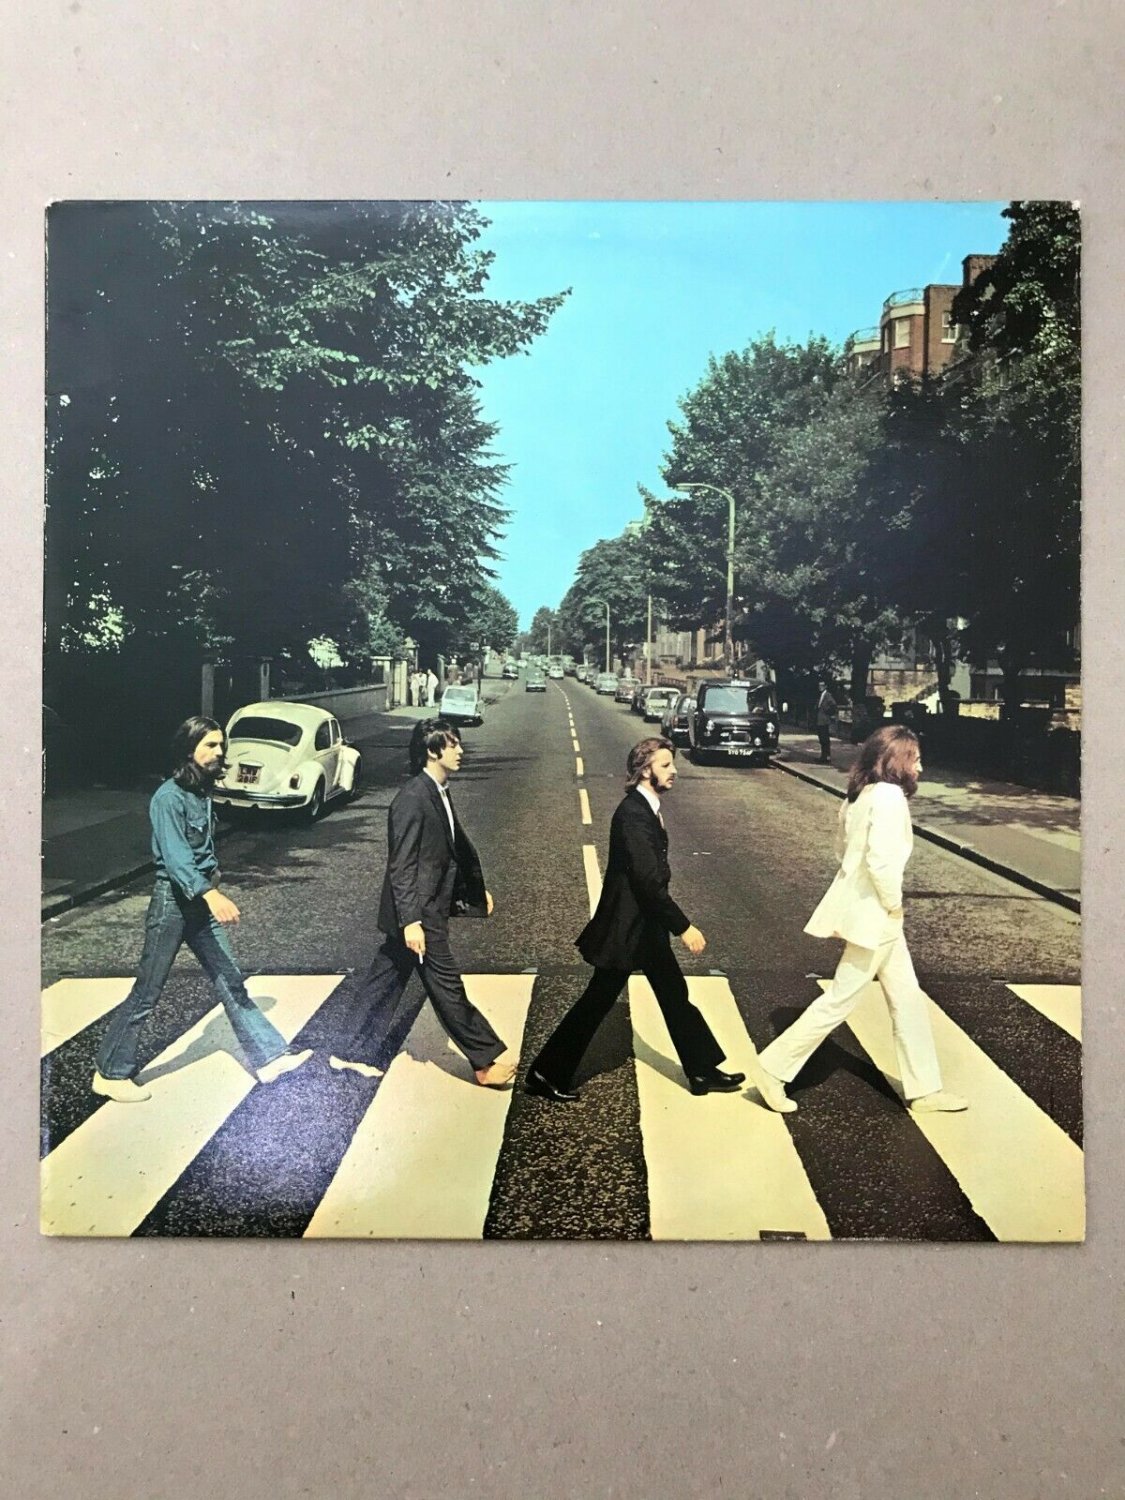 The Beatles â��â�� Abbey Road SO-383, STEREO, Winchester Pressing, with Her Majesty